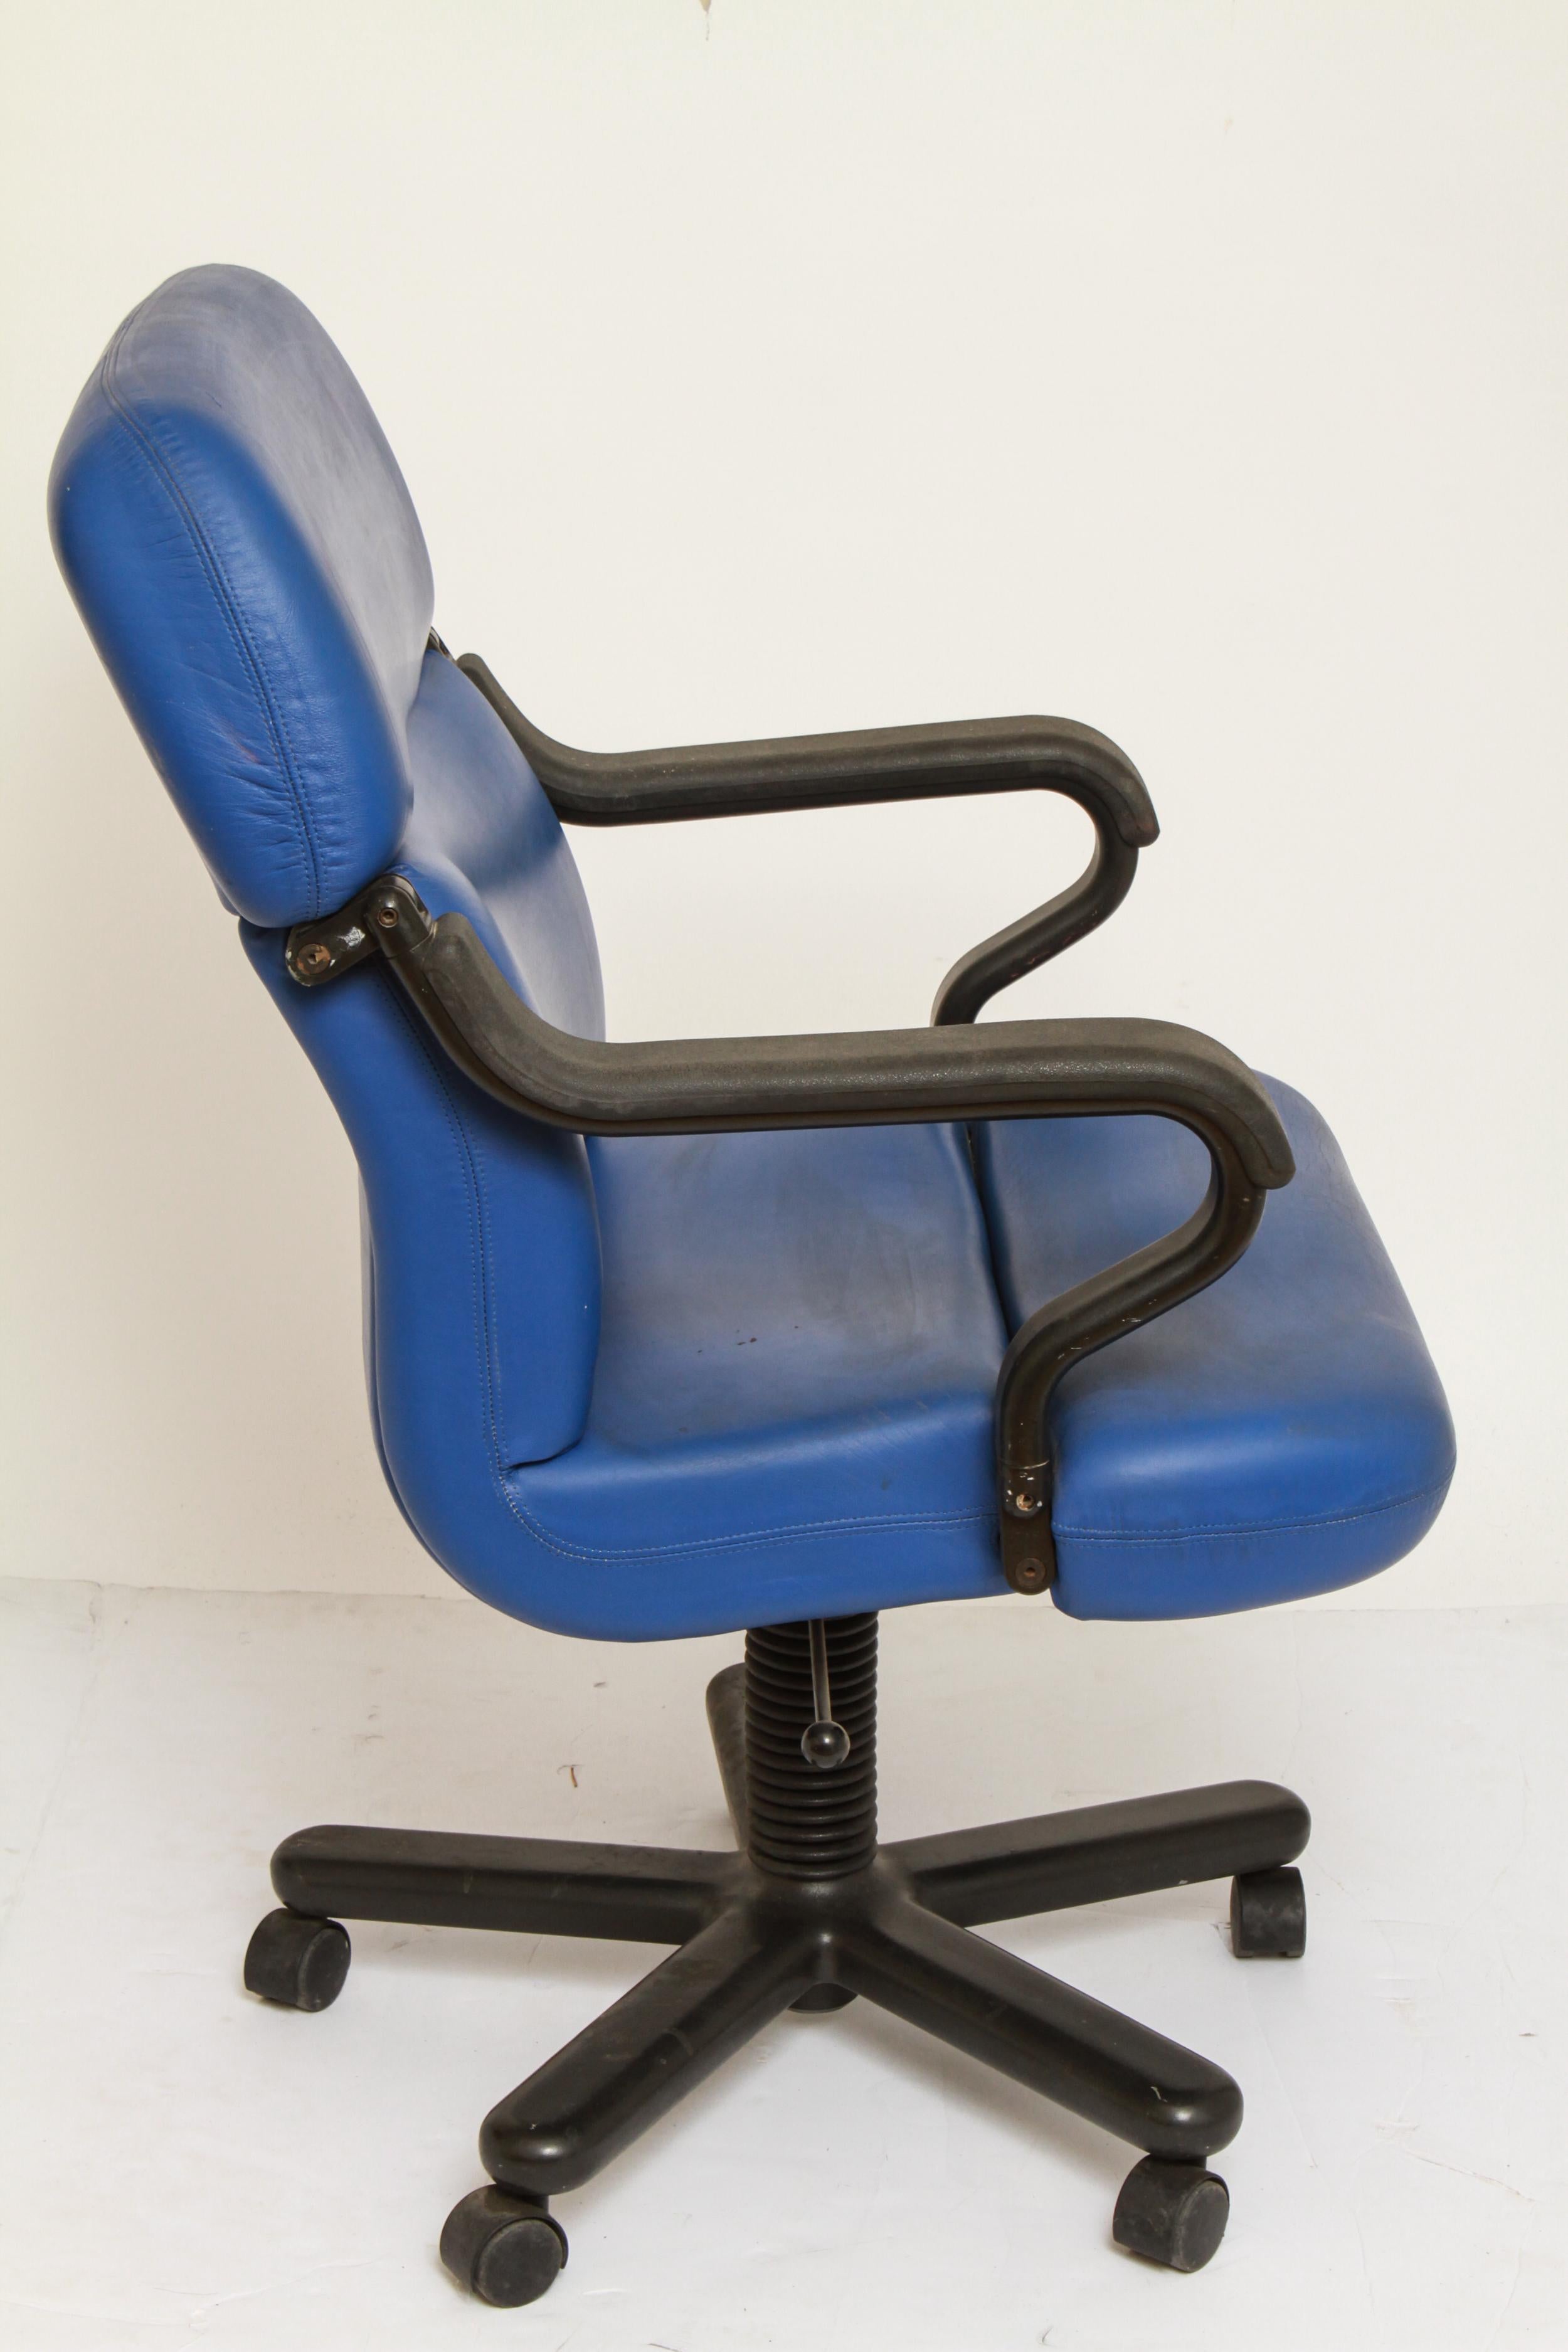 Mid-Century Modern executive office chair in the style of Knoll with blue leather-upholstering and with a molded black plastic frame, on five wheeled legs. The piece is in great vintage condition. From the estate of Peter Knoll.